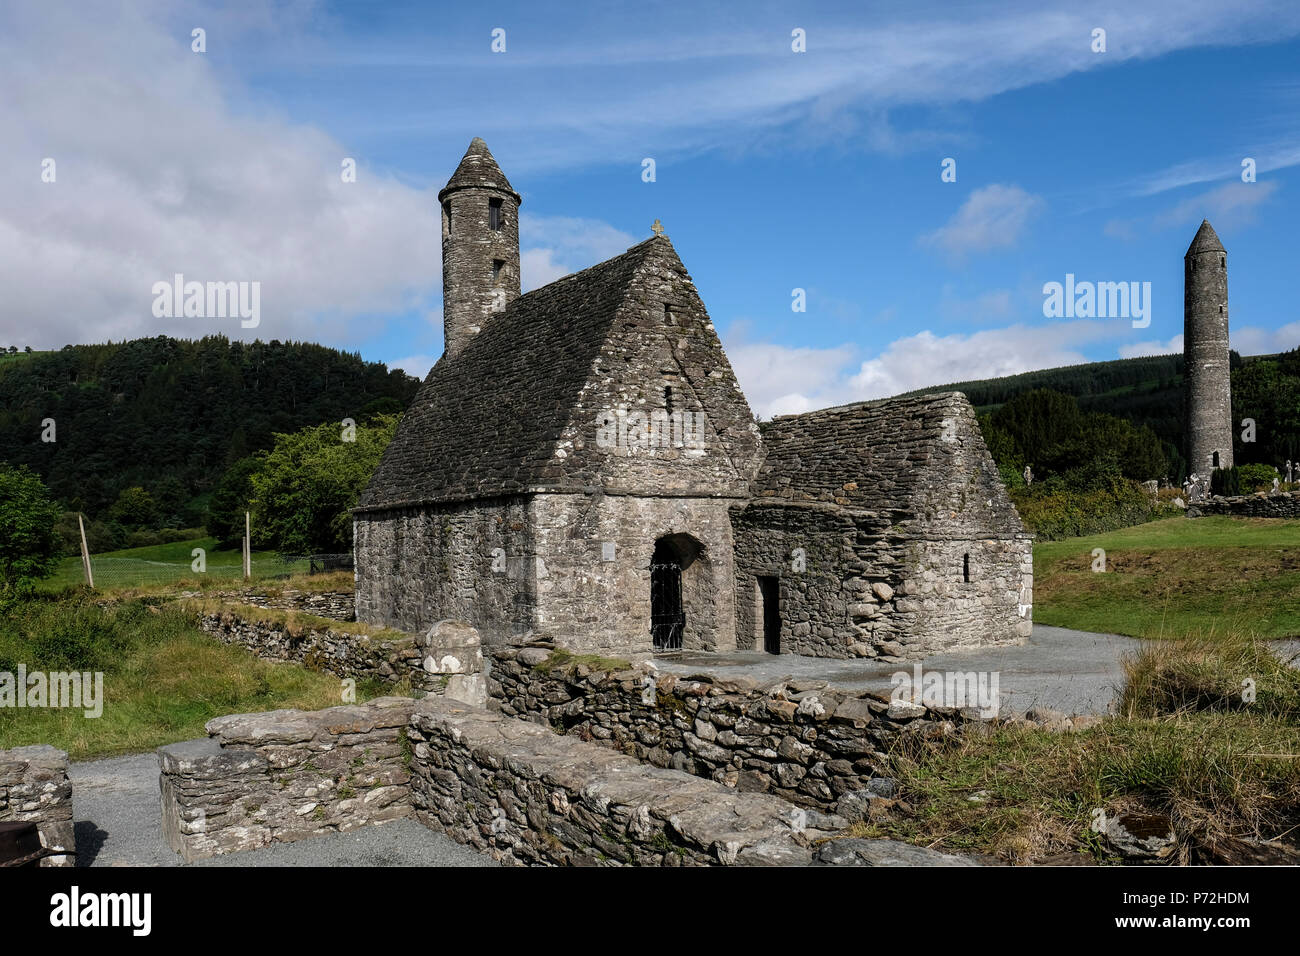 St. Kevin's Church (St. Kevin's Kitchen), a nave-and-chancel church of the 12th century, Glendalough, County Wicklow, Leinster, Republic of Ireland Stock Photo